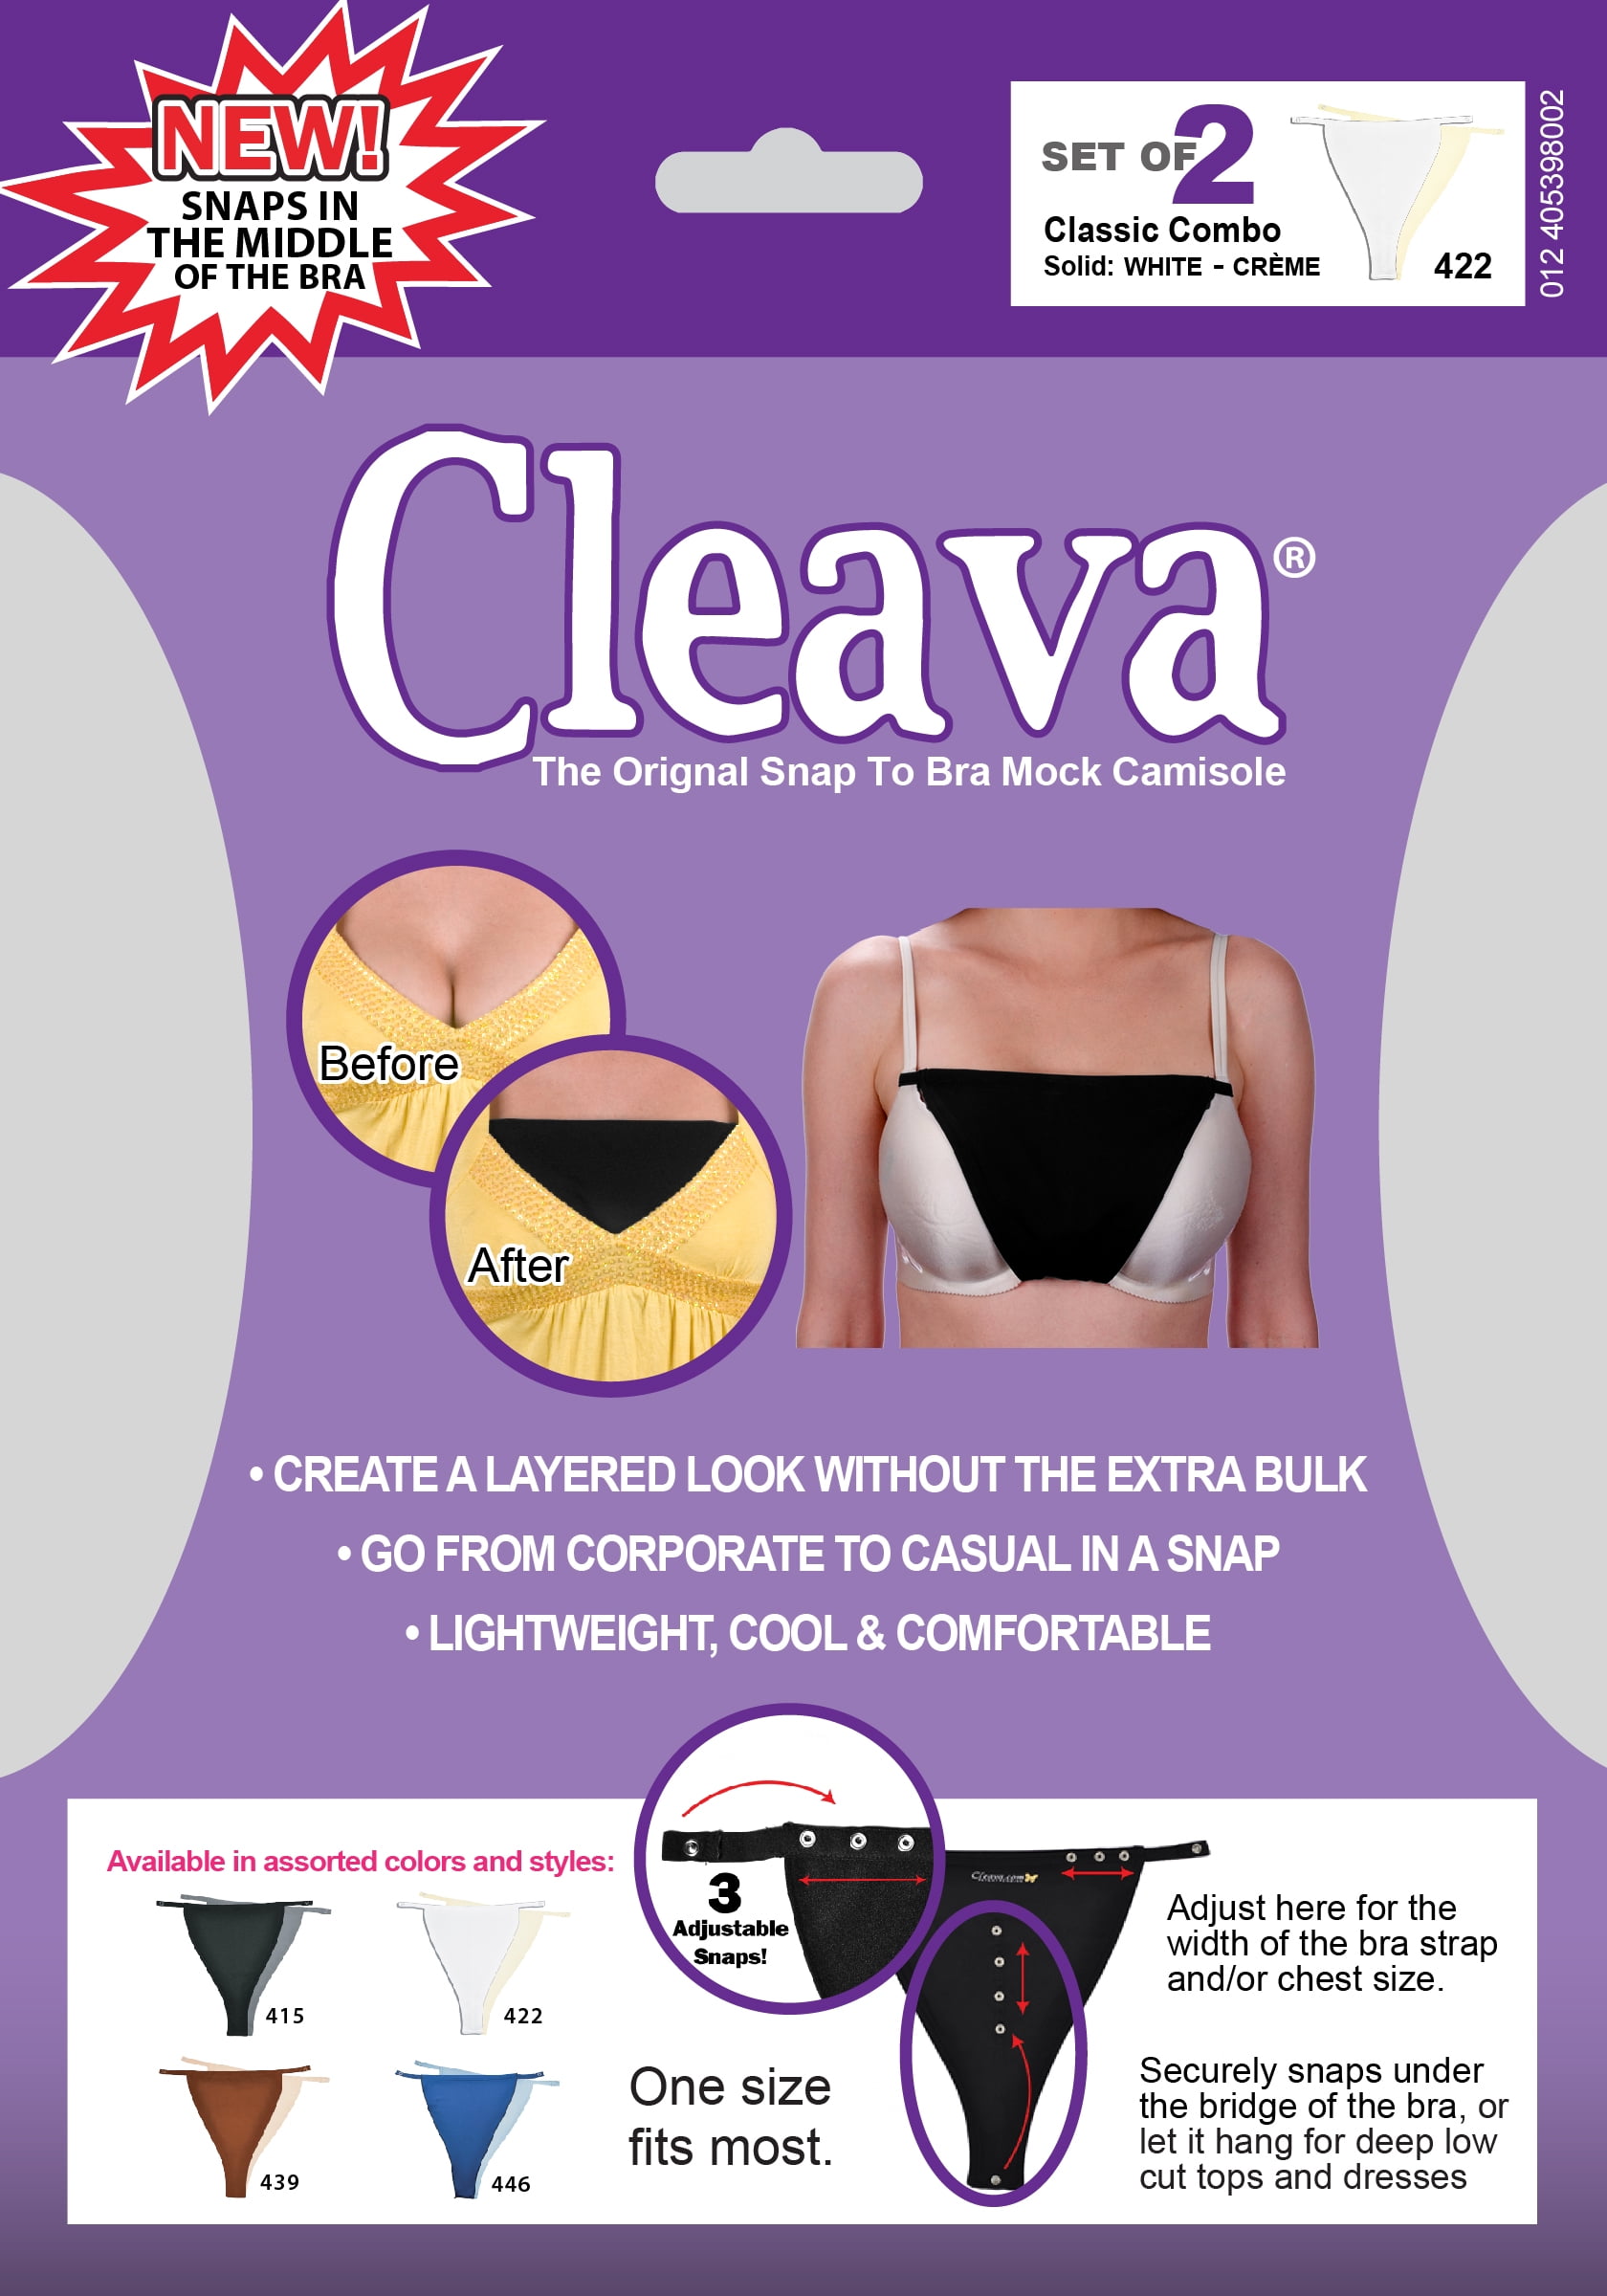 Cleavage Coverup by Cleava Snap-to-Bra Mock Camisole Original, White &  Creme Combo Set, Size One Size